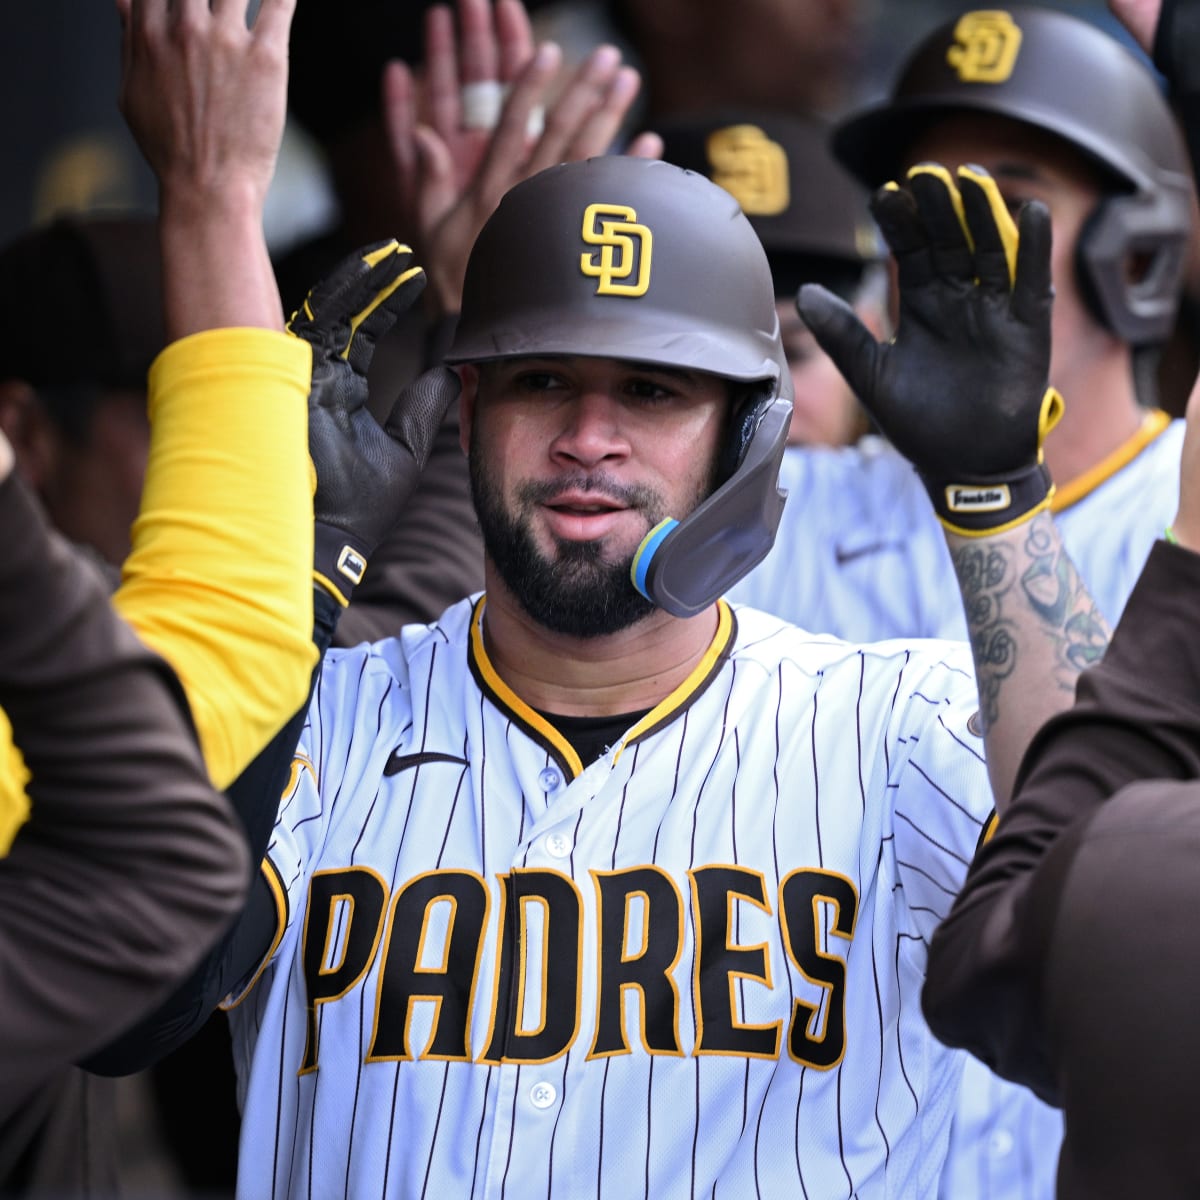 Padres Manager Assures Gary Sanchez is Supported by Entire